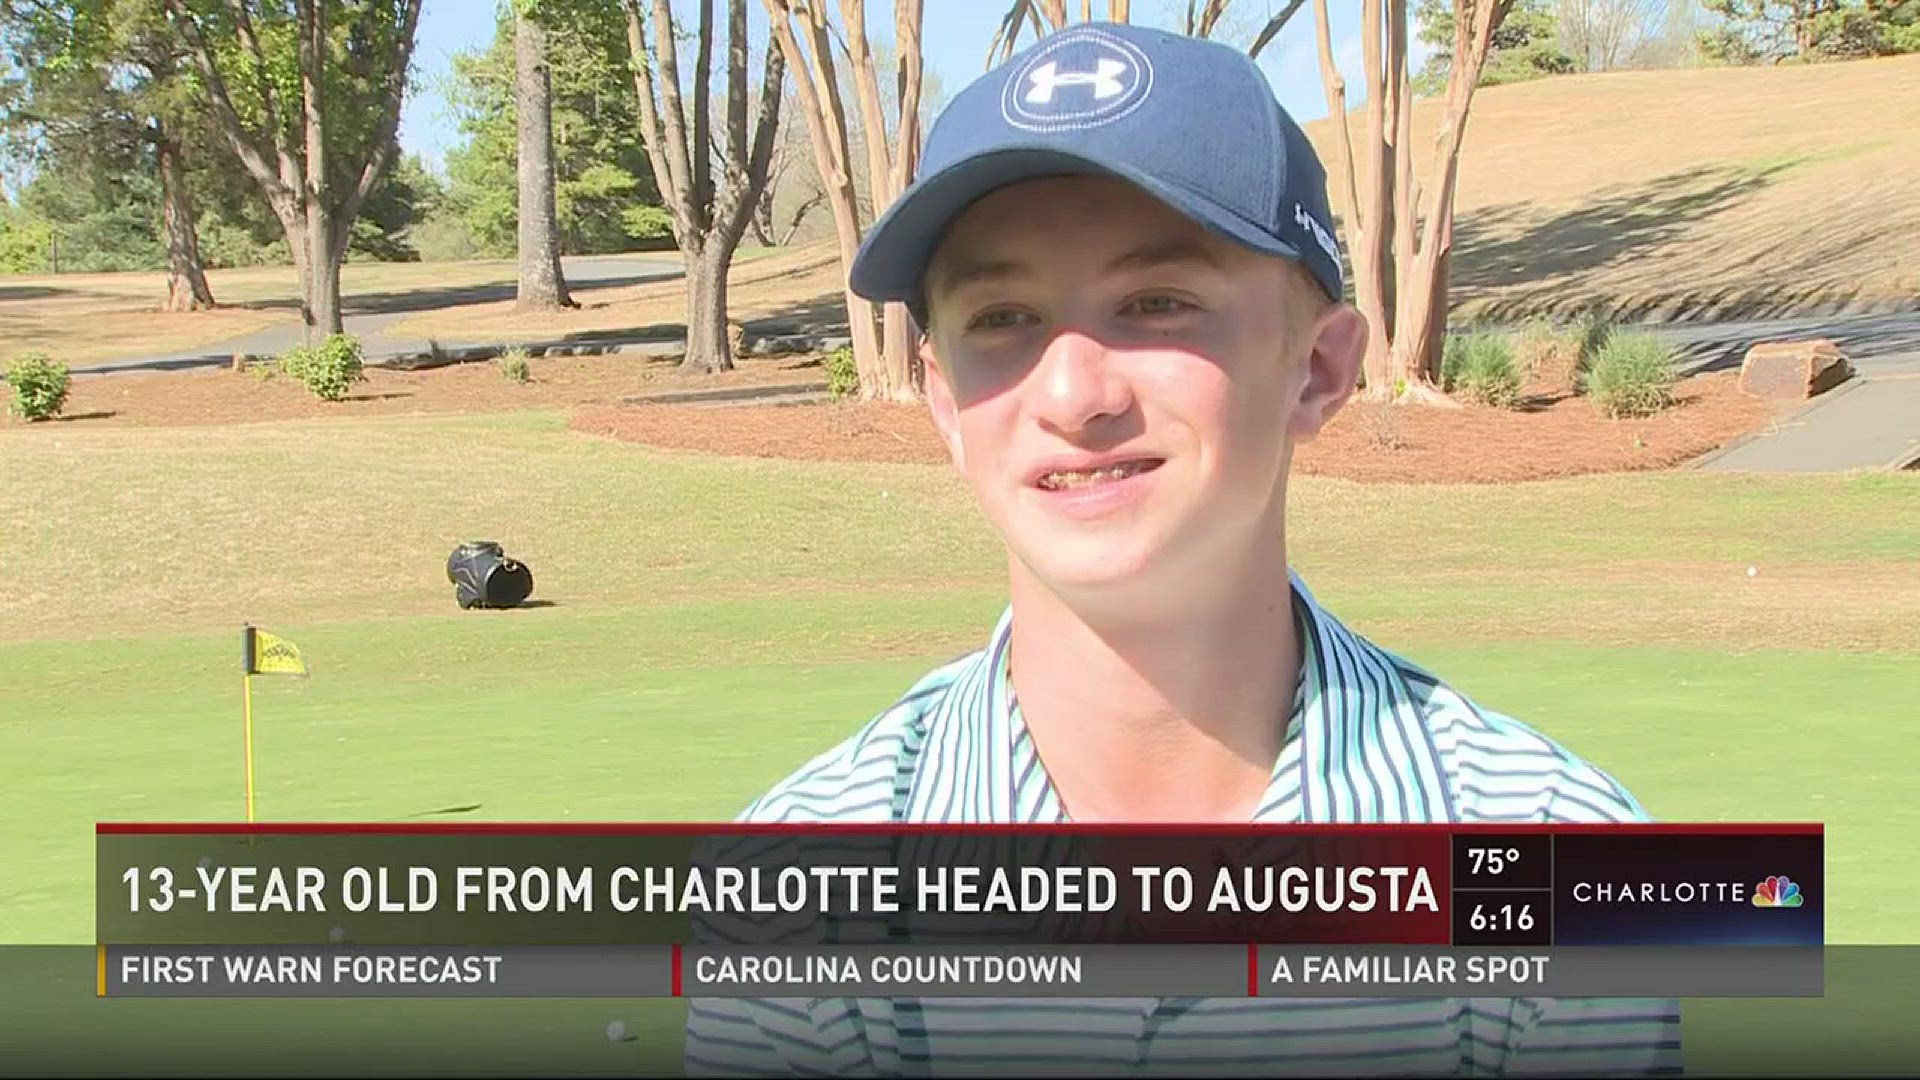 Maybe you've heard of the punt, pass and kick competition organized by the NFL. In golf, there's the drive, chip and putt competition. This year, Charlotte is represented by 13-year-old Clinton Daly.